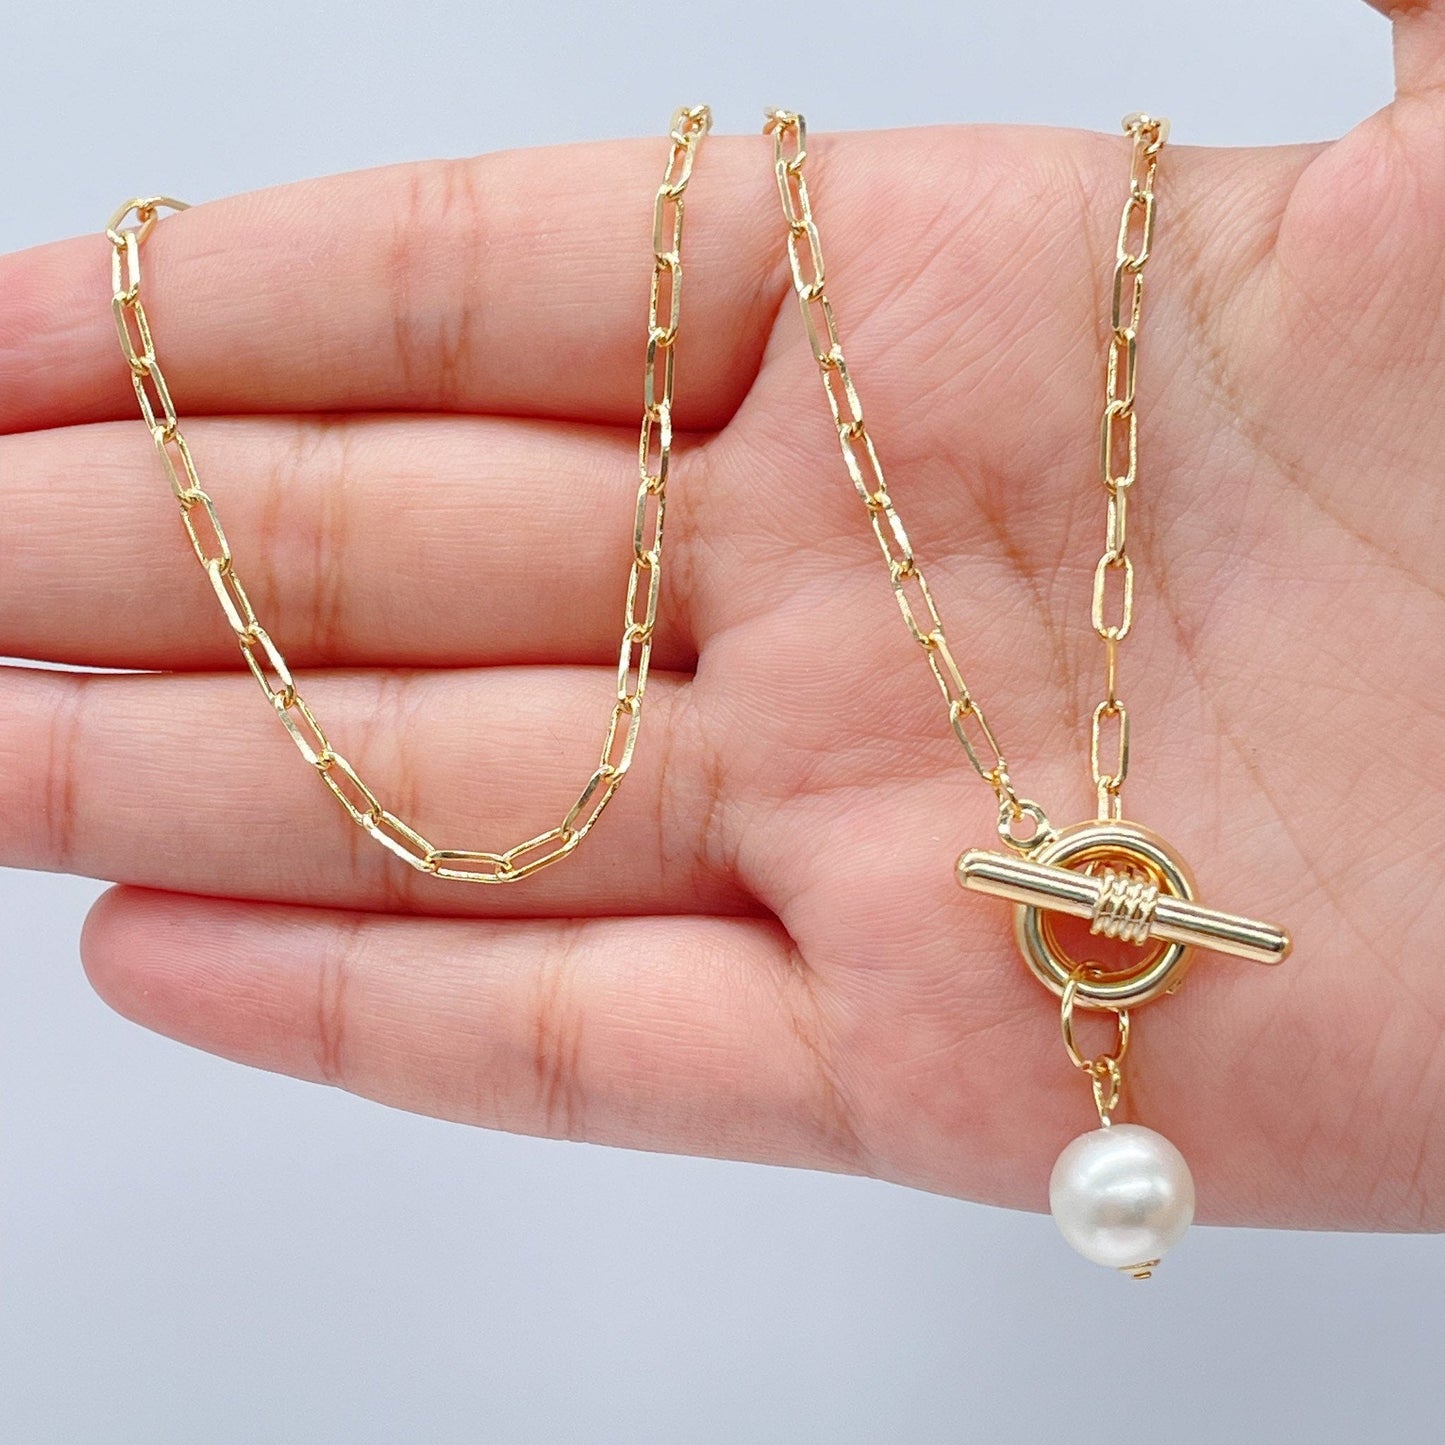 18k Gold Layered Thin Paper Clip Necklace Lariat Featuring Pearl Toggle Closing